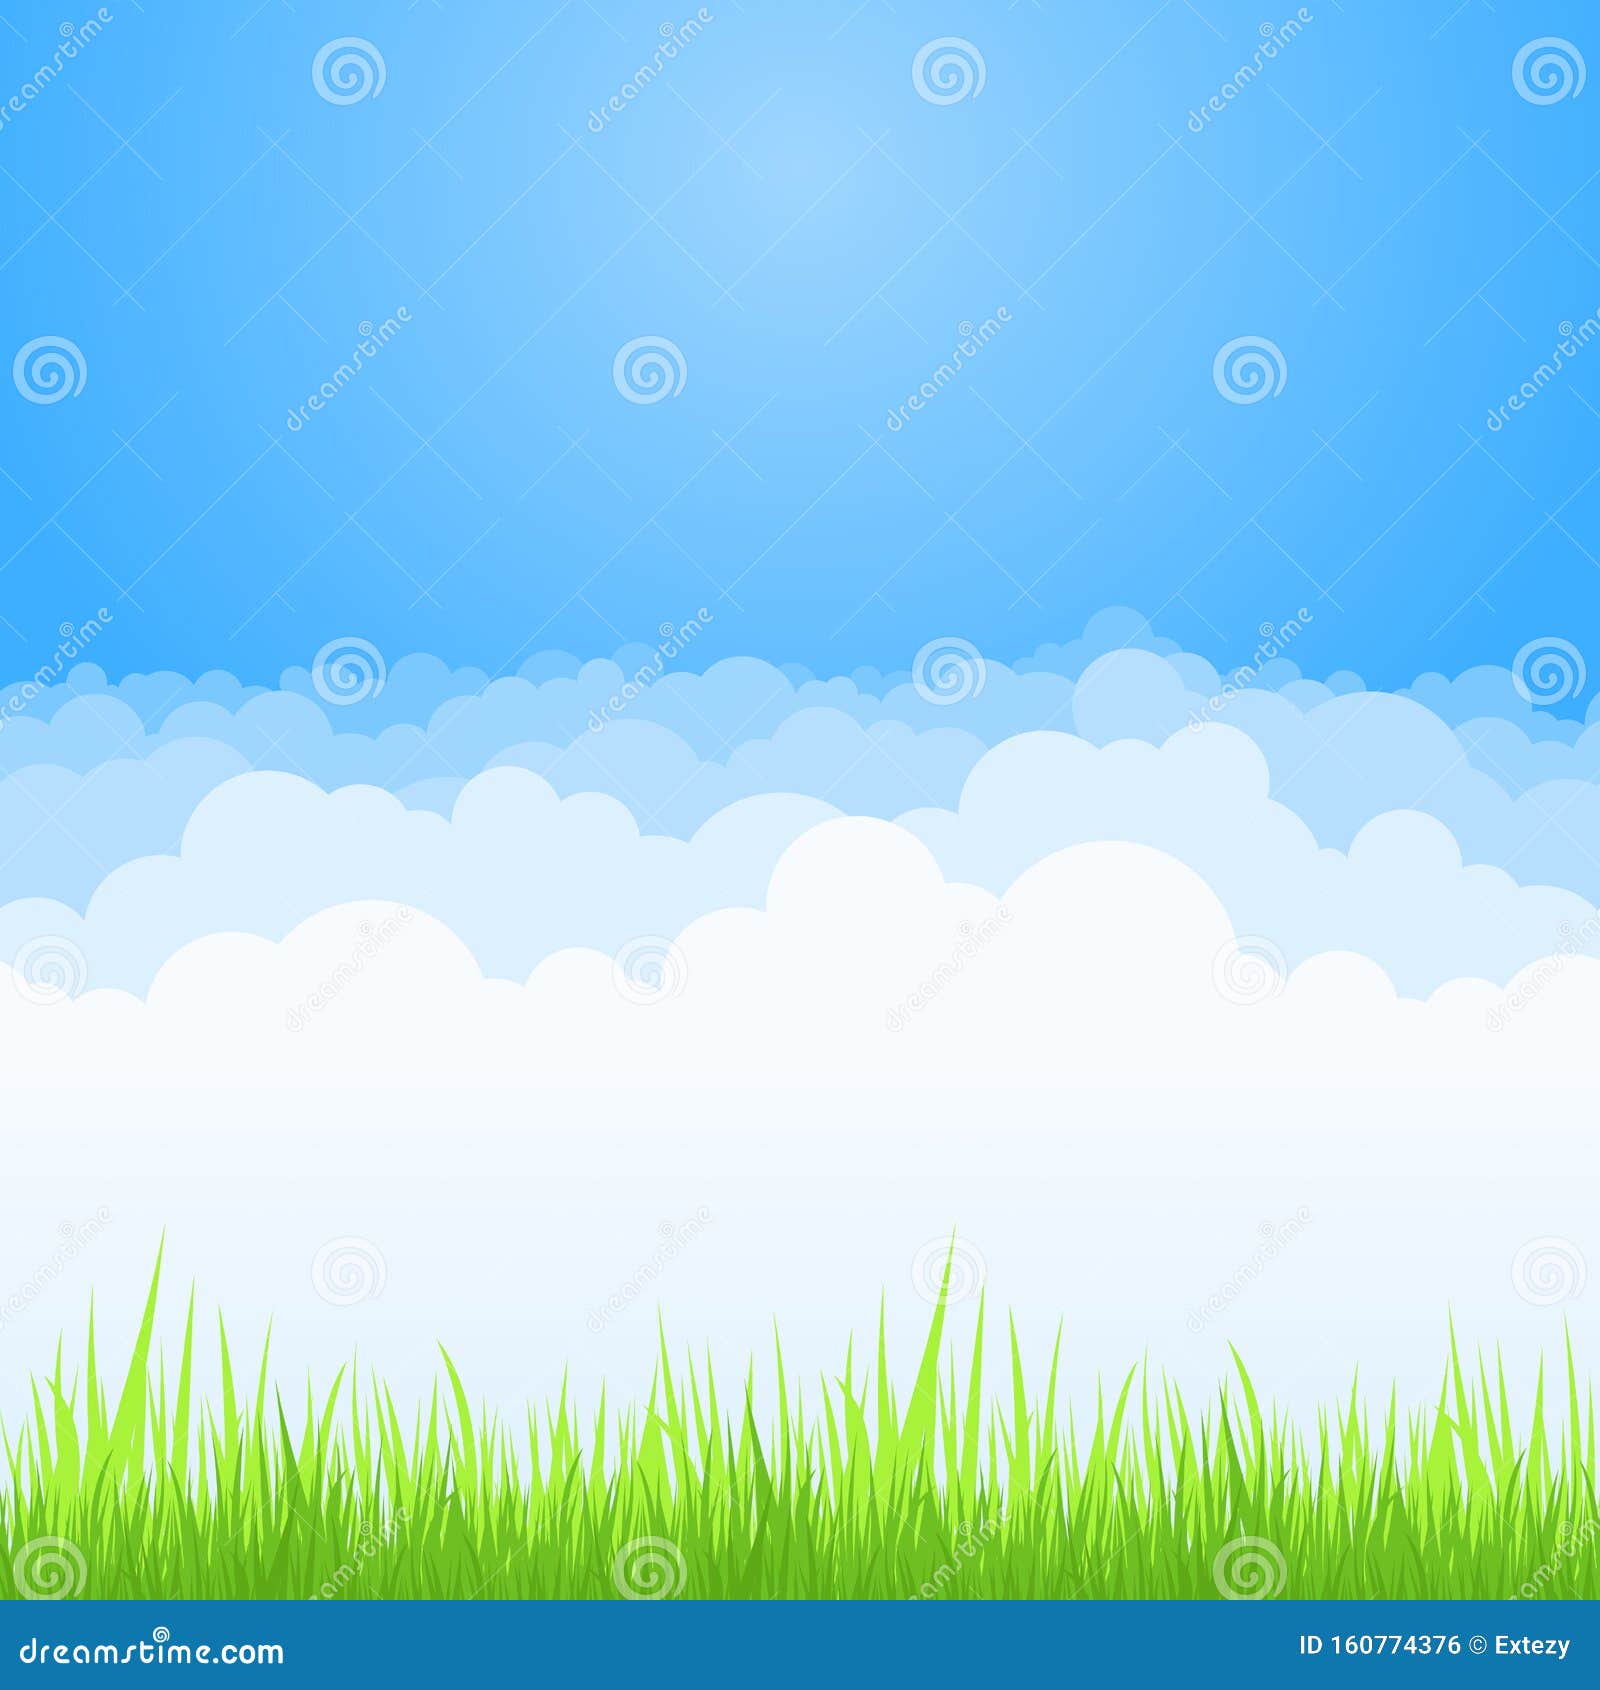 Clouds on Blue Sky with Green Grass Background. Vector Flat Air White Cloud  Cartoon on Sky Horizon Stock Vector - Illustration of park, landscape:  160774376